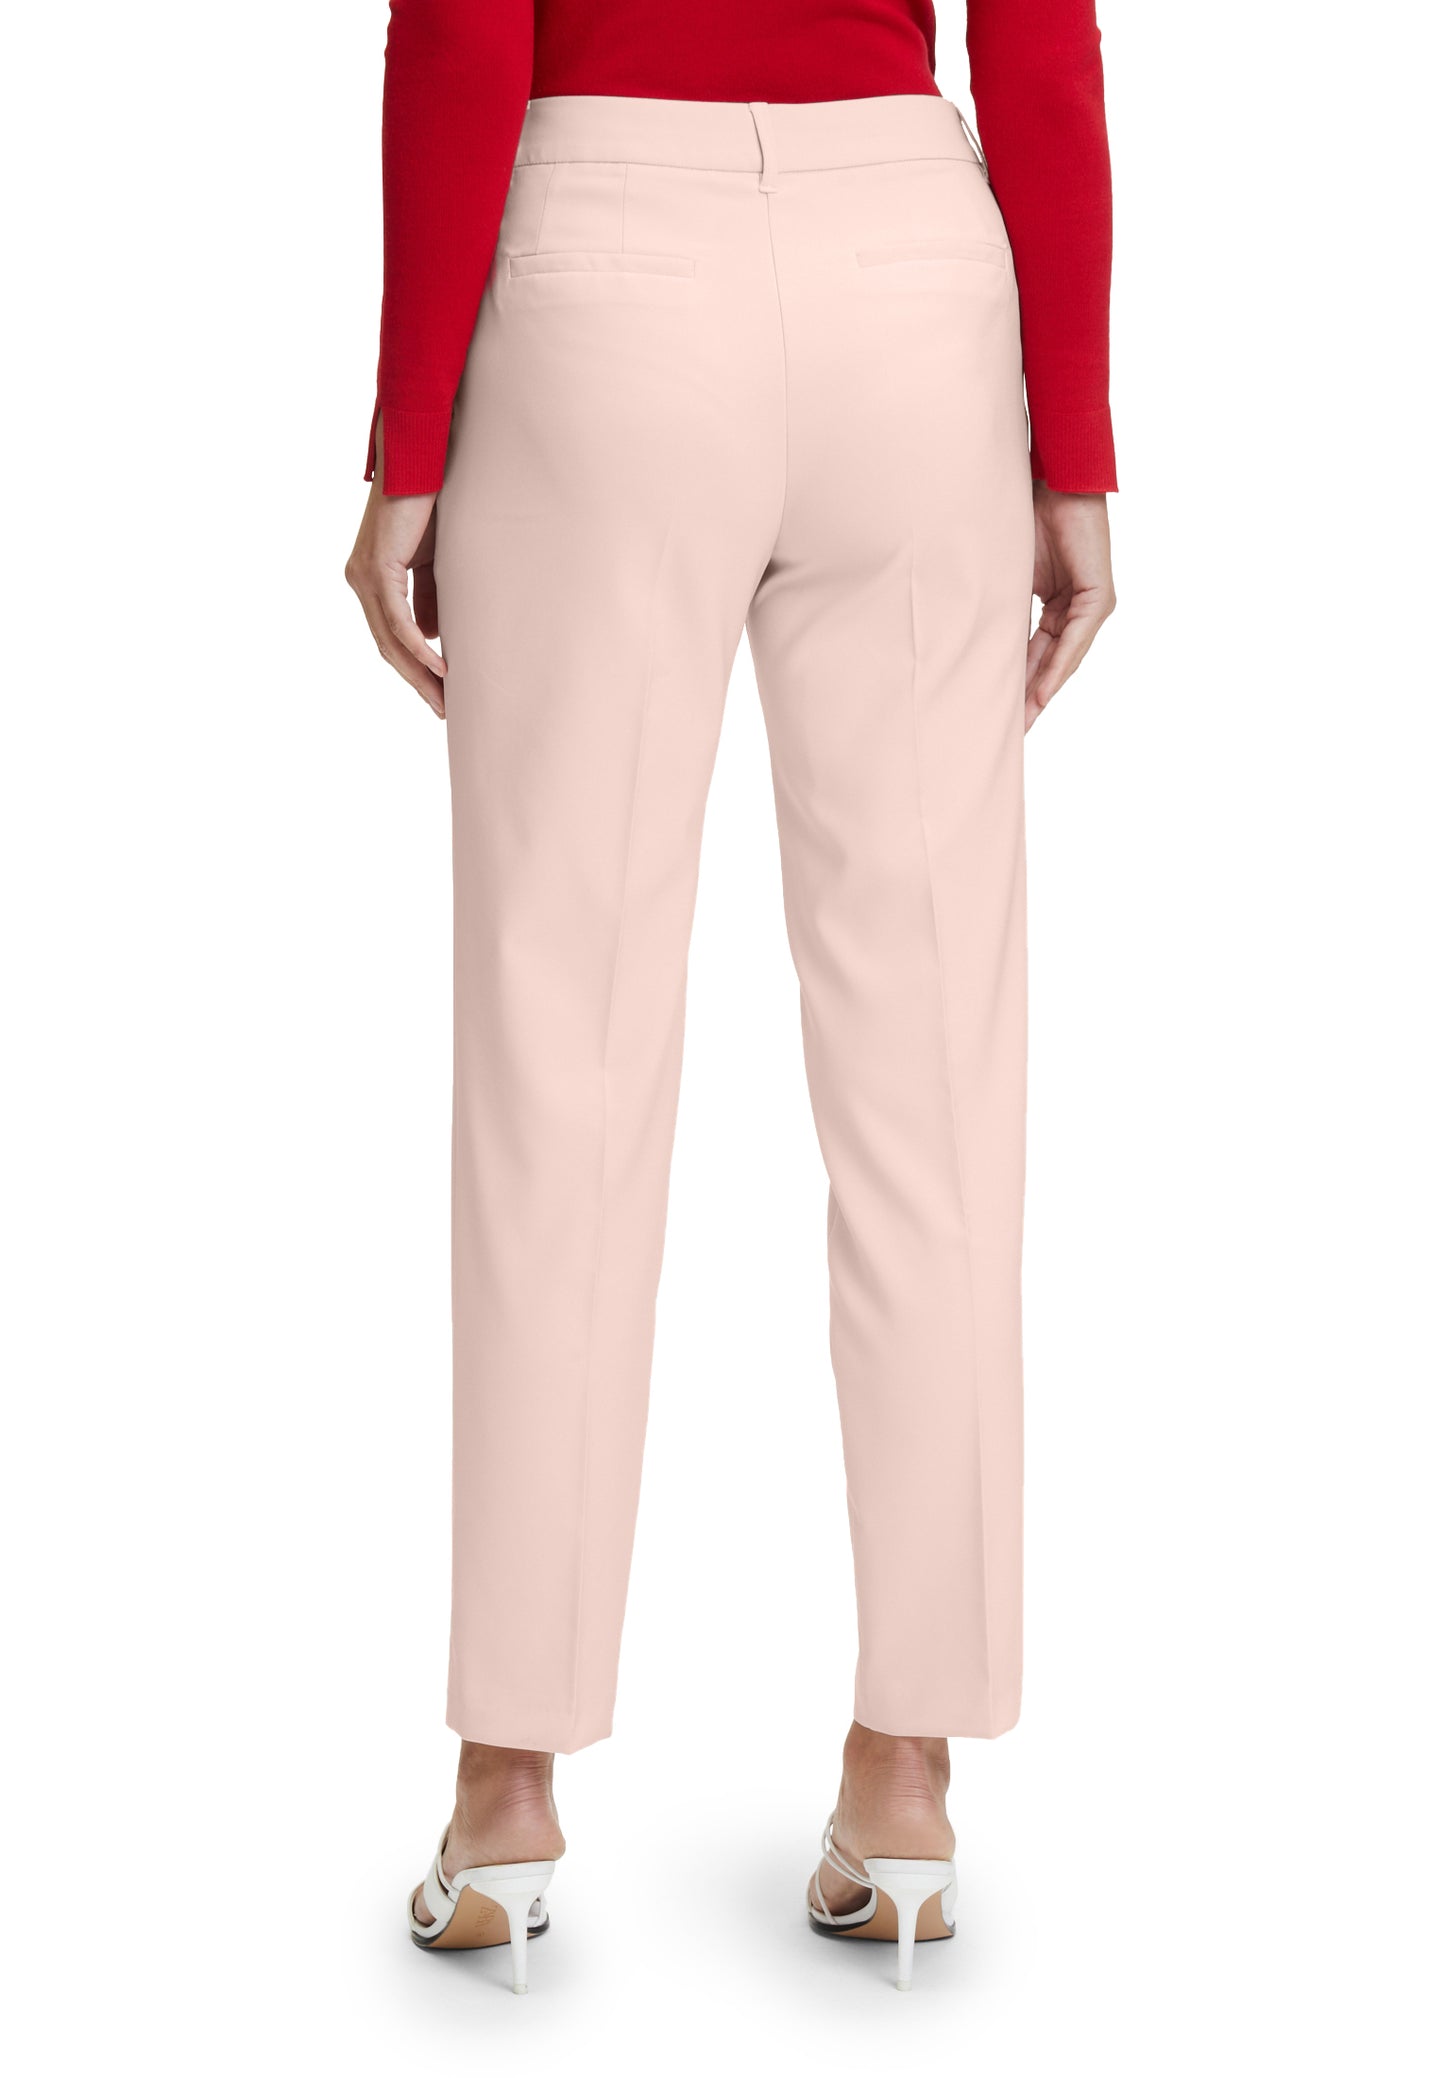 Betty Barclay 6002/1080  Trousers